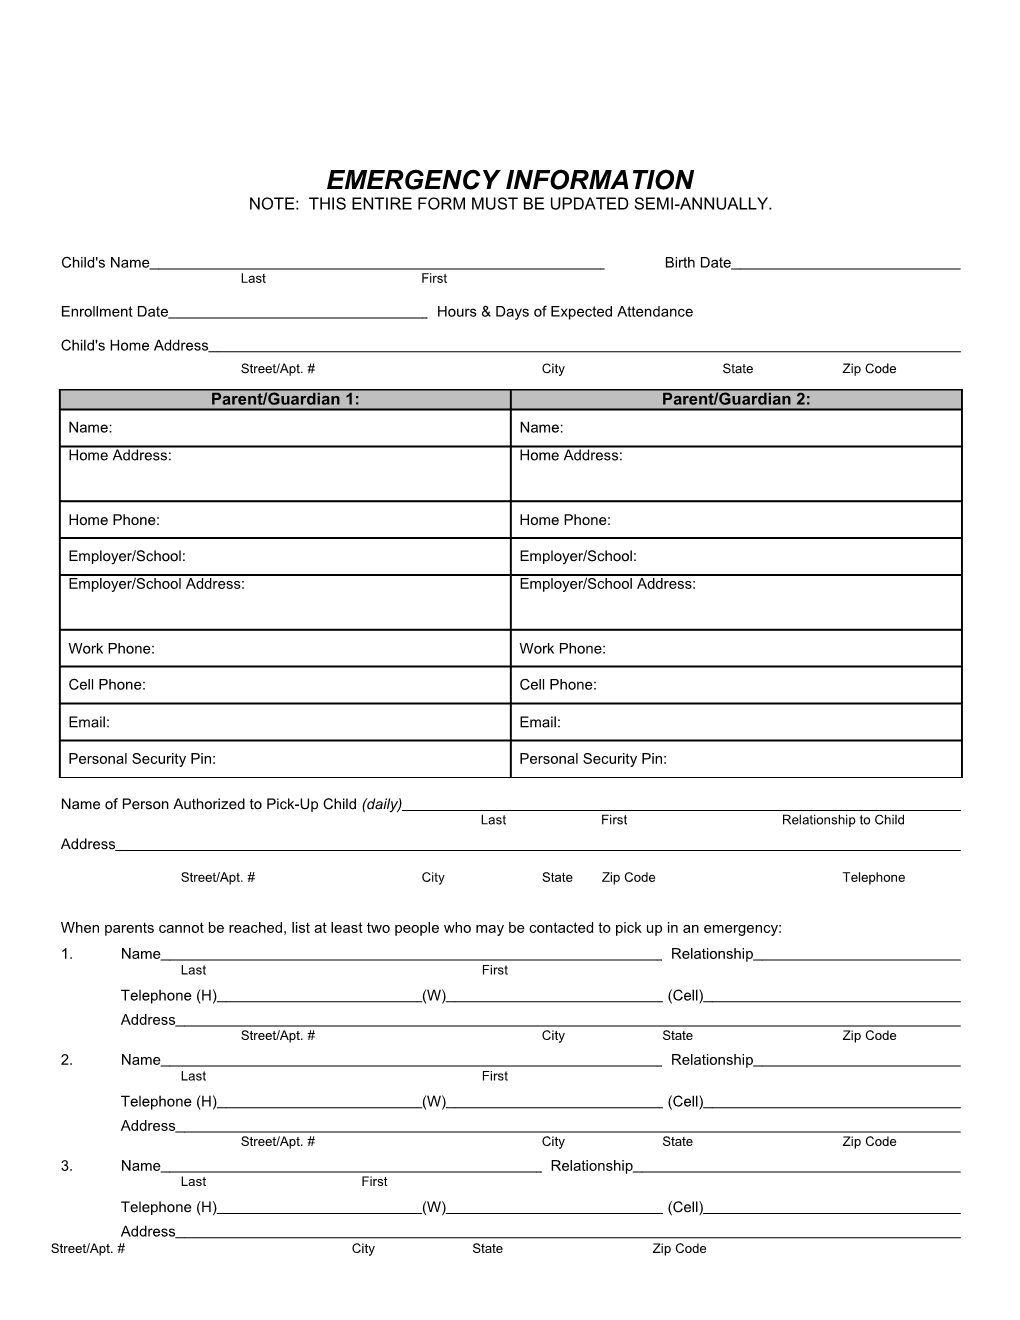 Note:This Entire Form Must Be Updated Semi-Annually